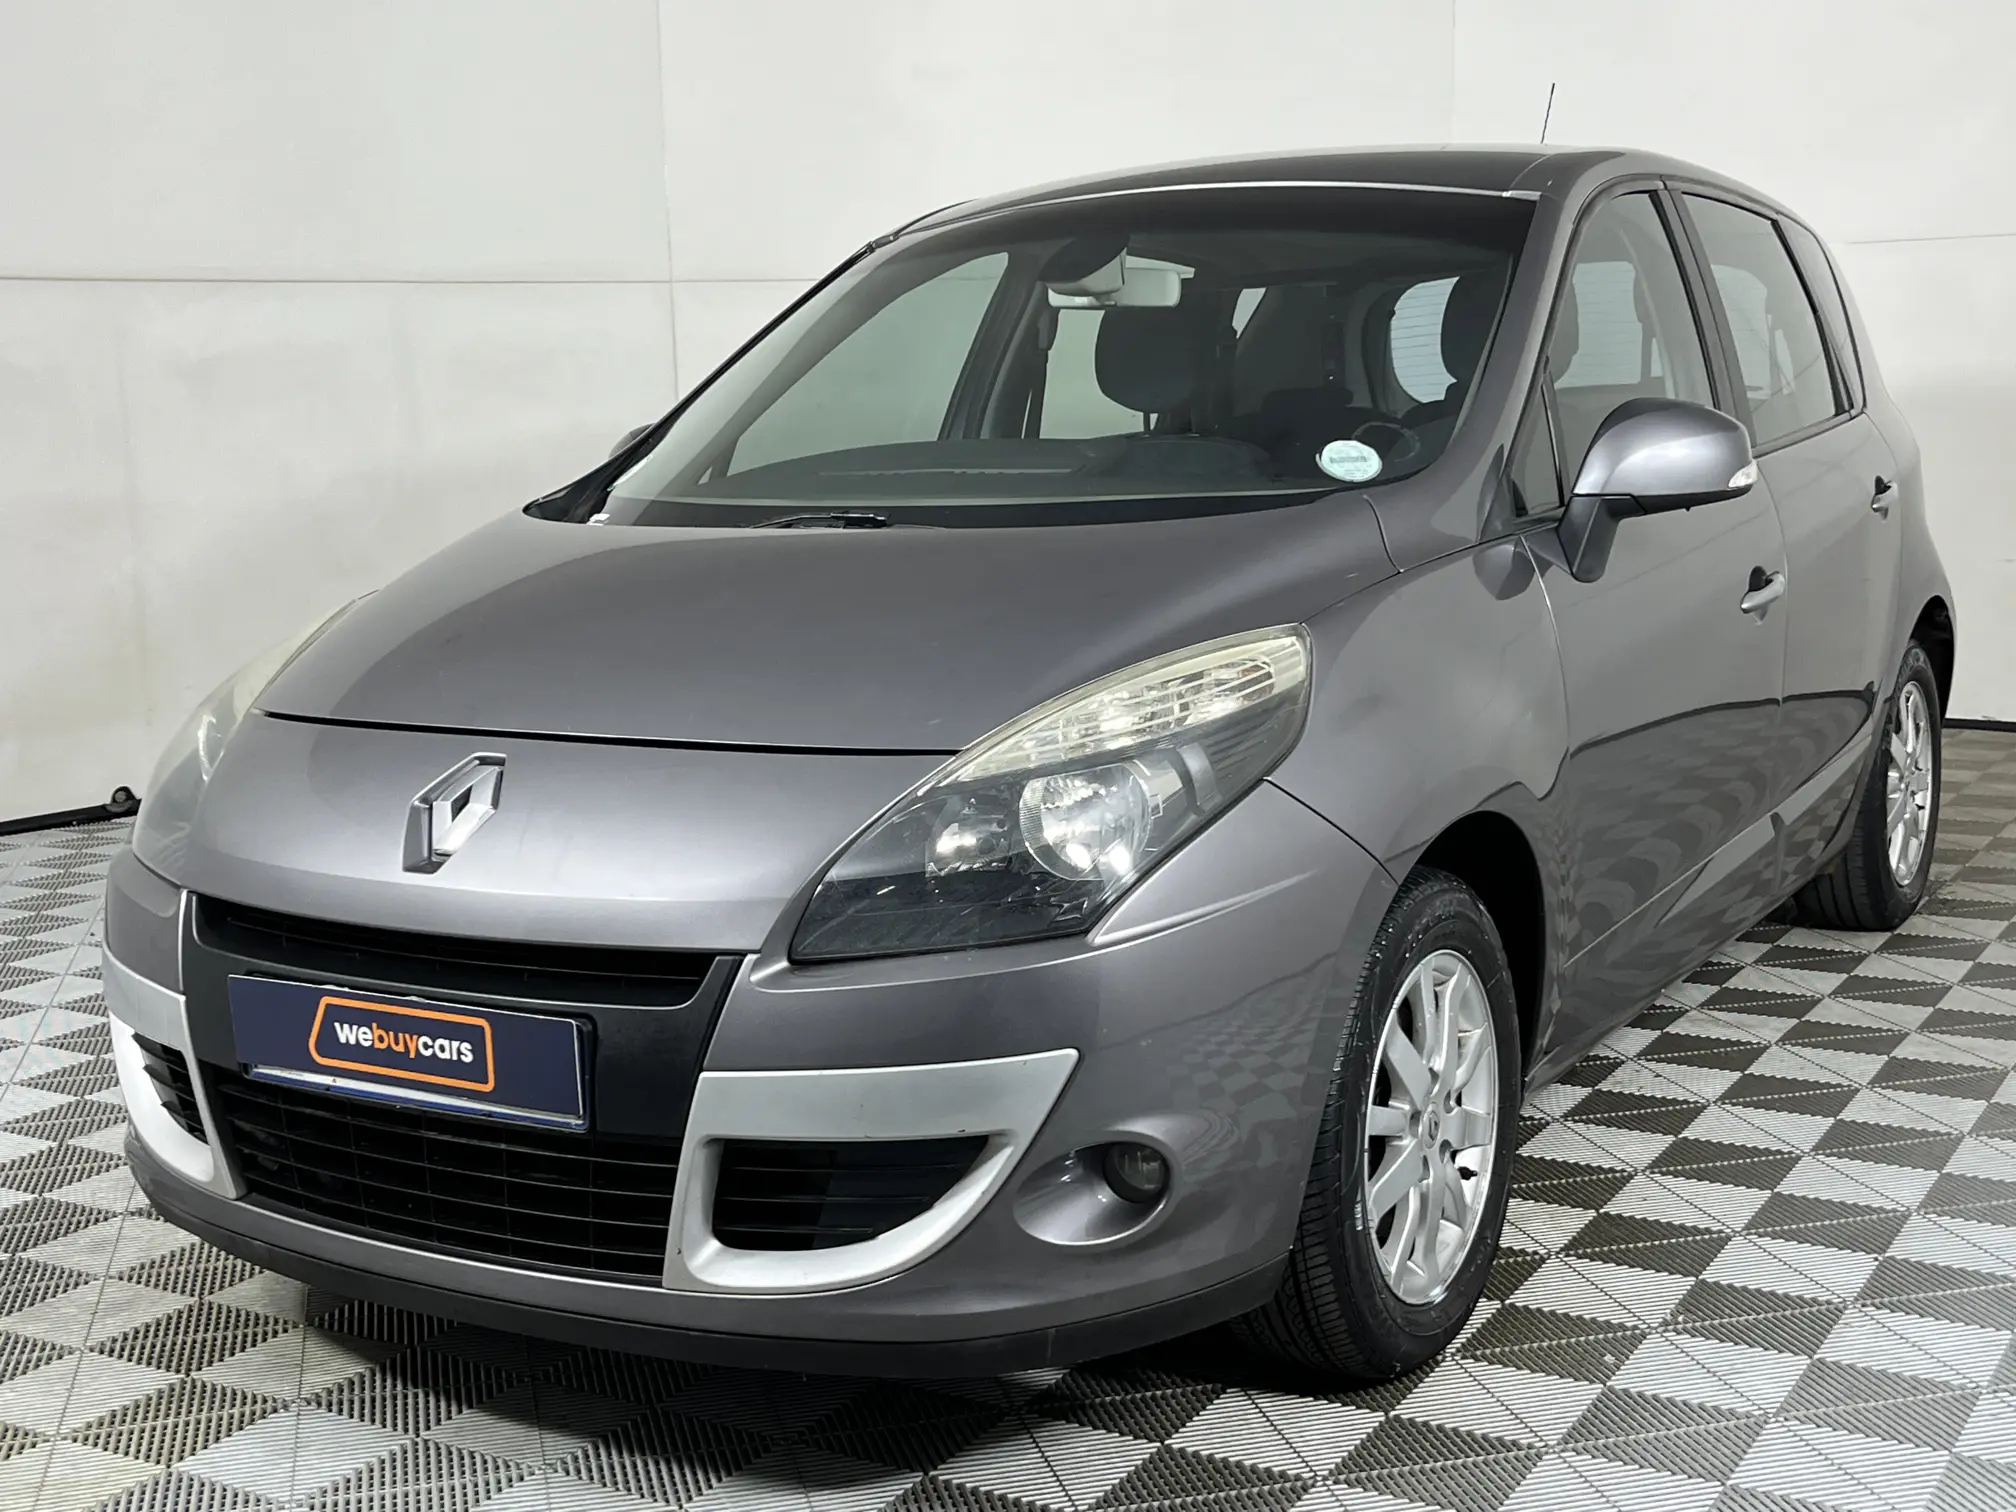 2010 Renault Scenic III 1.9dci Dynamique